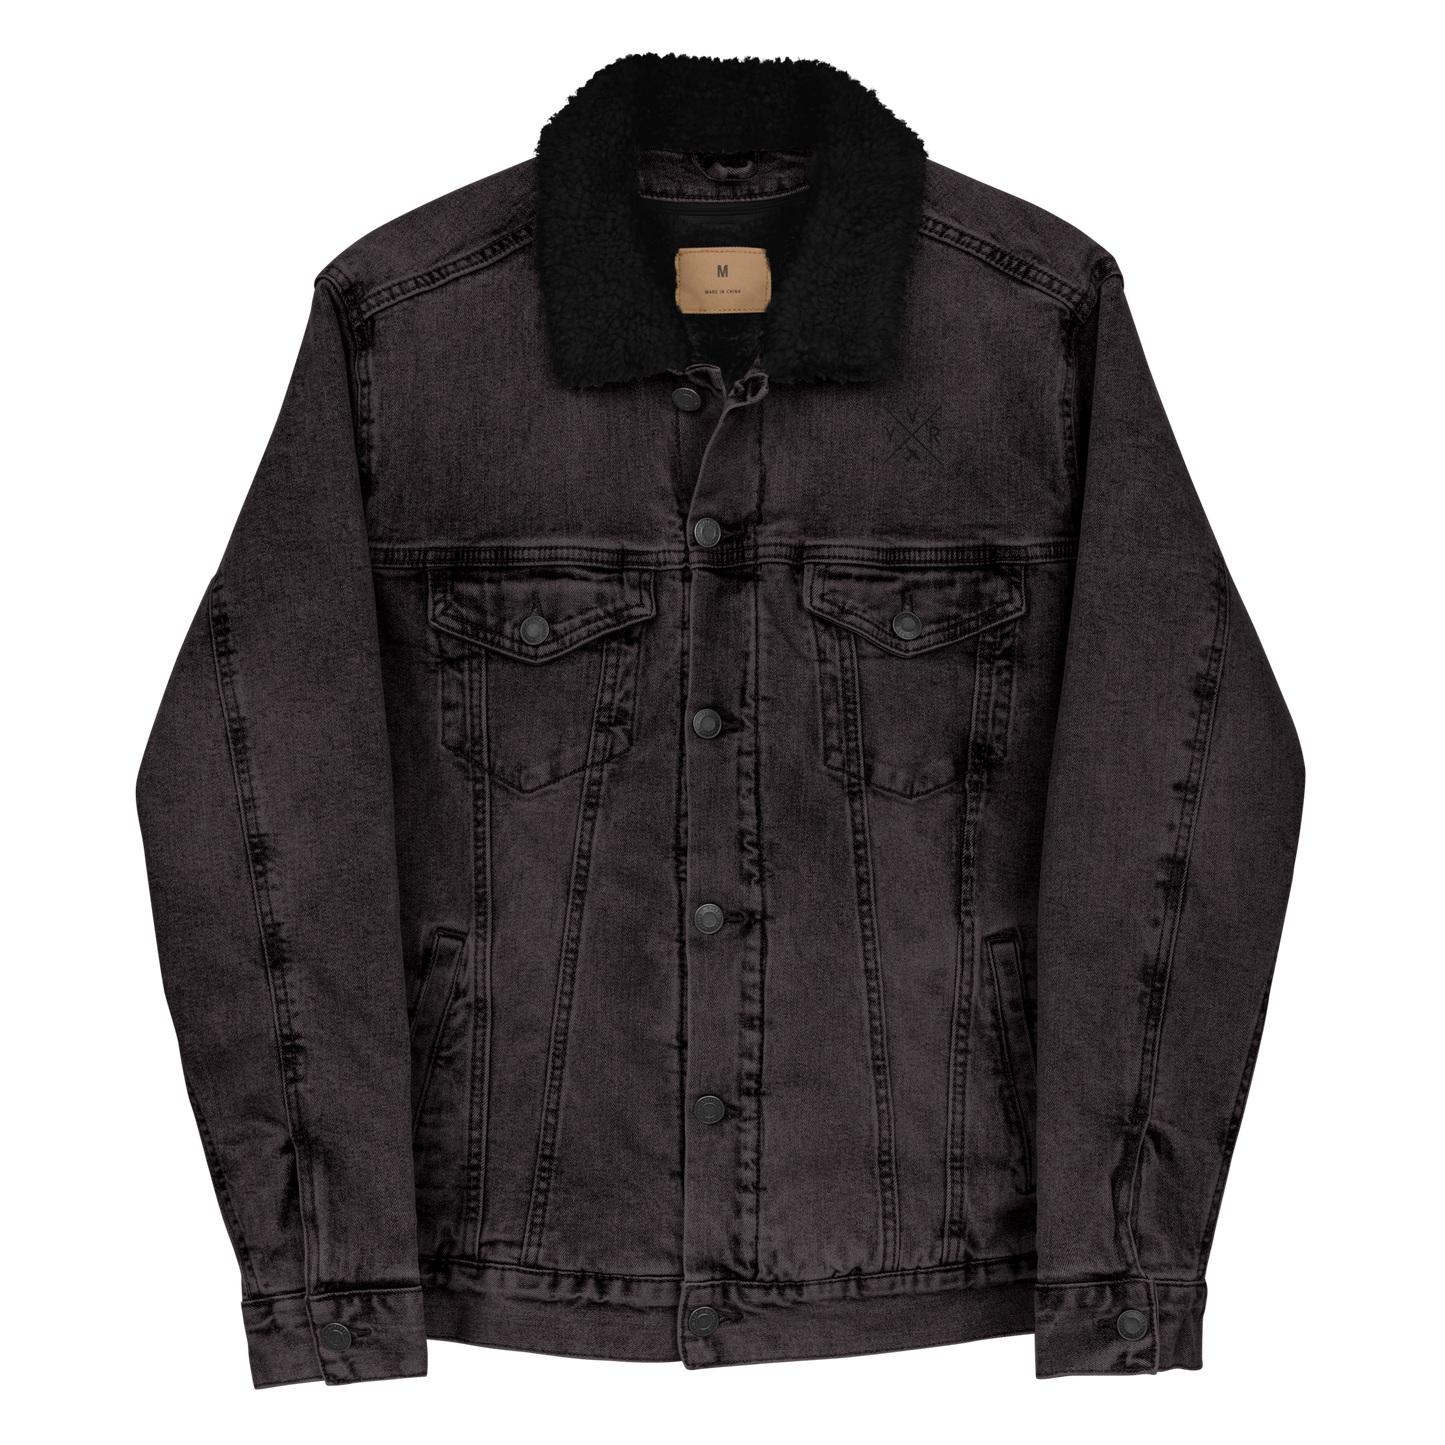 YHM Designs - YVR Vancouver Denim Sherpa Jacket - Crossed-X Design with Airport Code and Vintage Propliner - Black & White Embroidery - Image 06